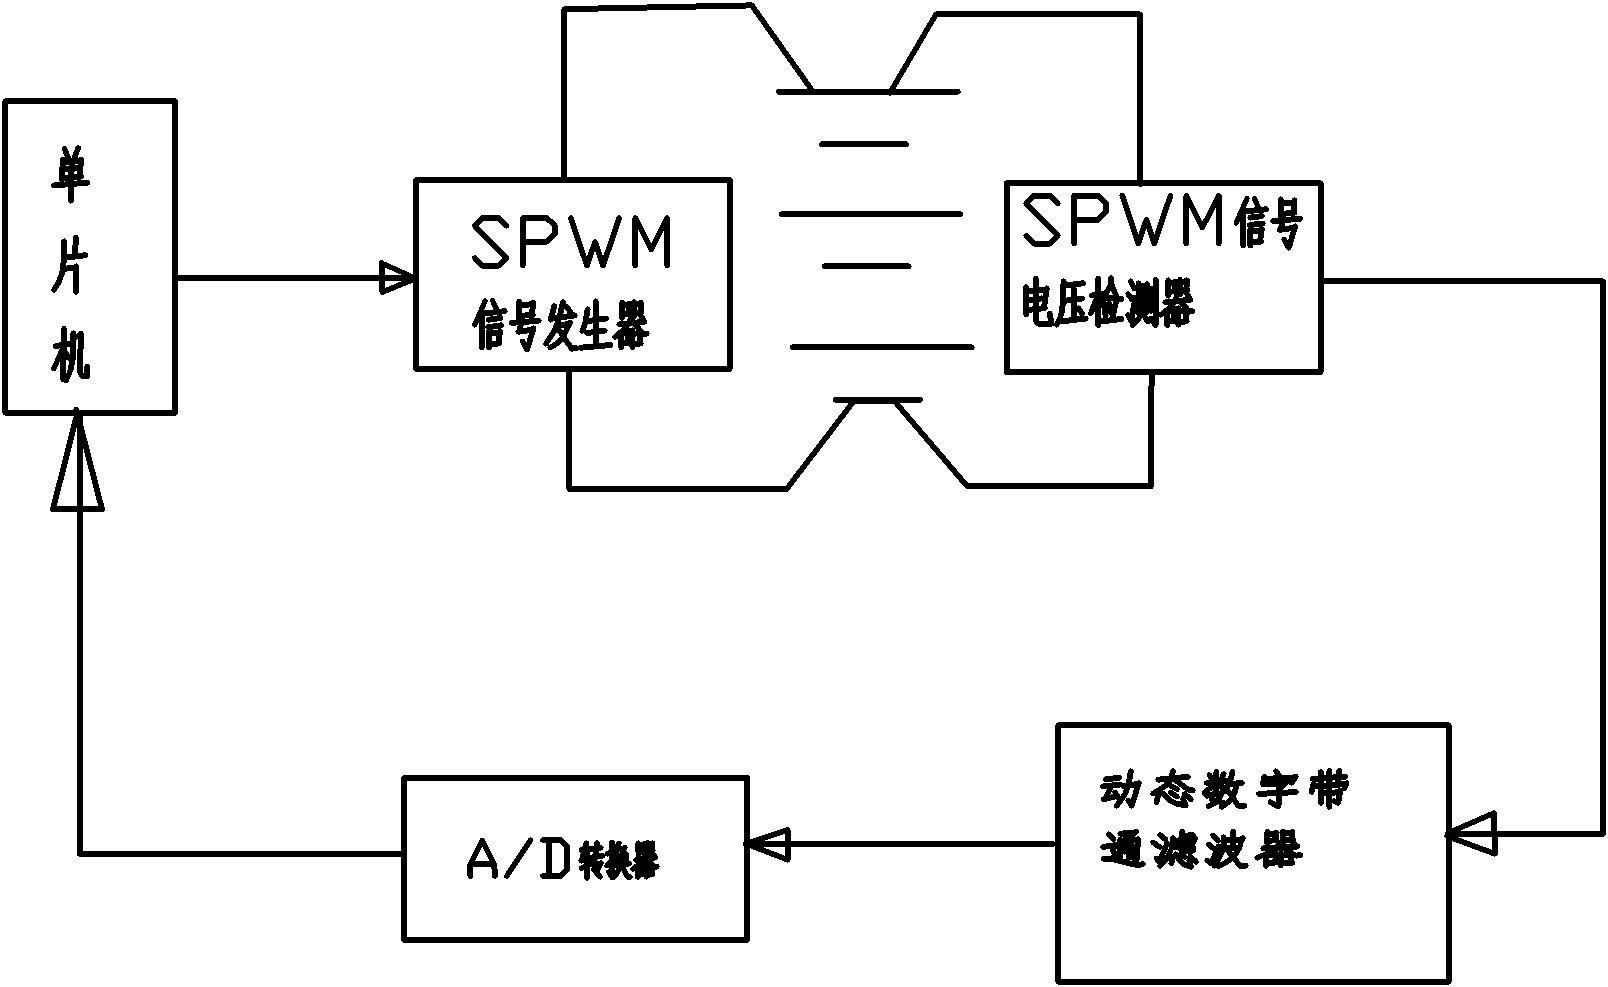 A storage battery impedance detection device stimulated by spwm signal generated by single chip microcomputer